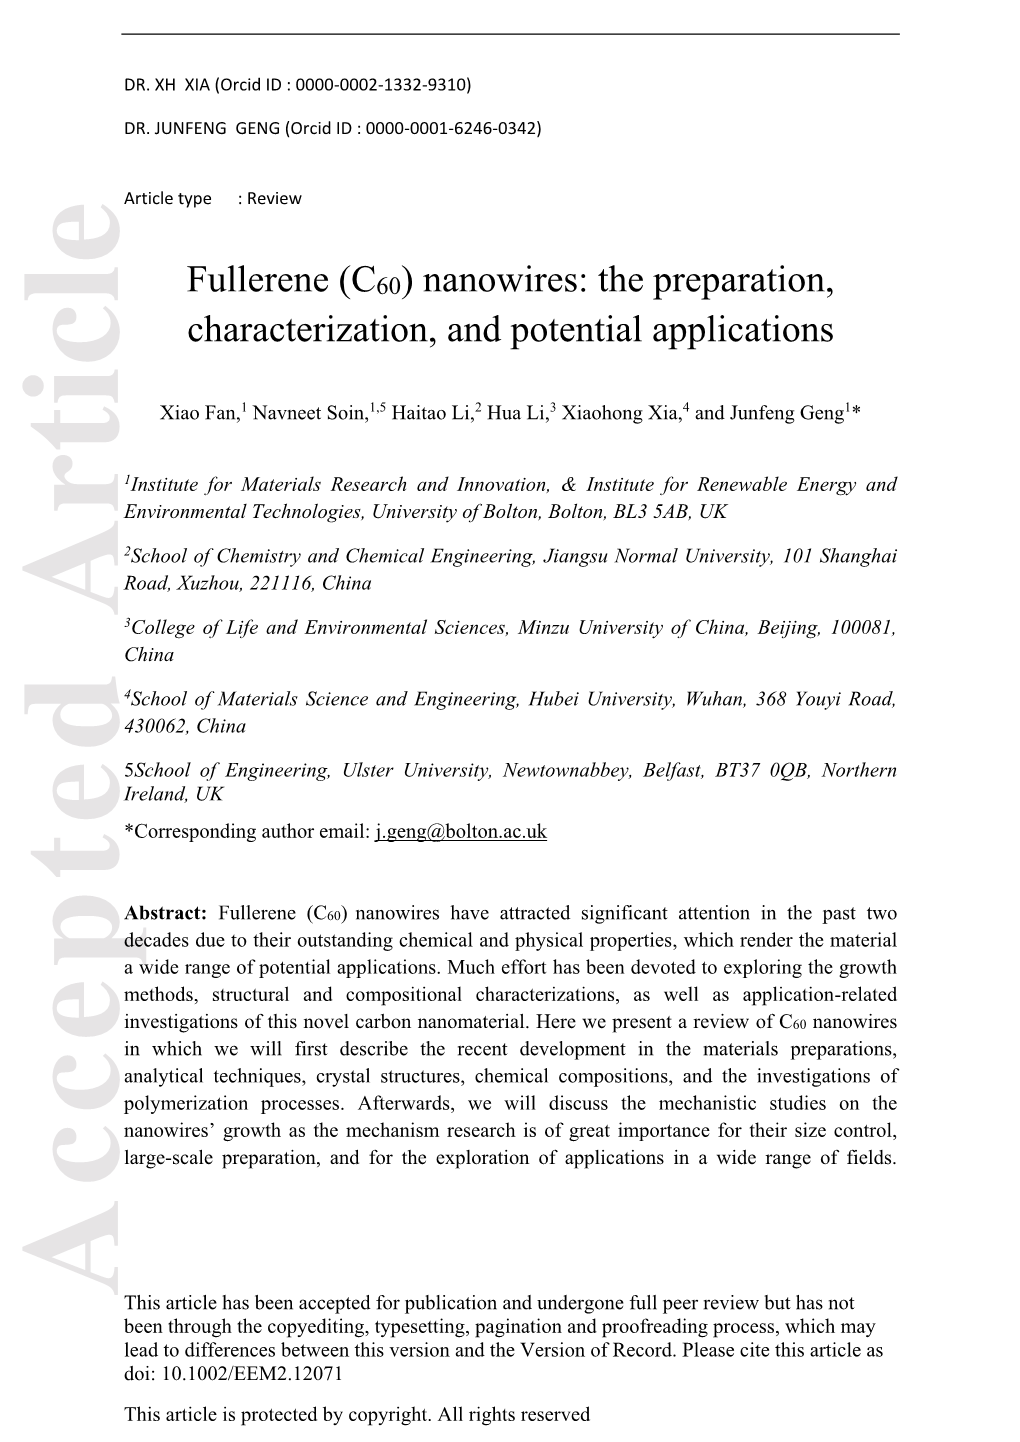 Fullerene (C60) Nanowires: the Preparation, Characterization, And